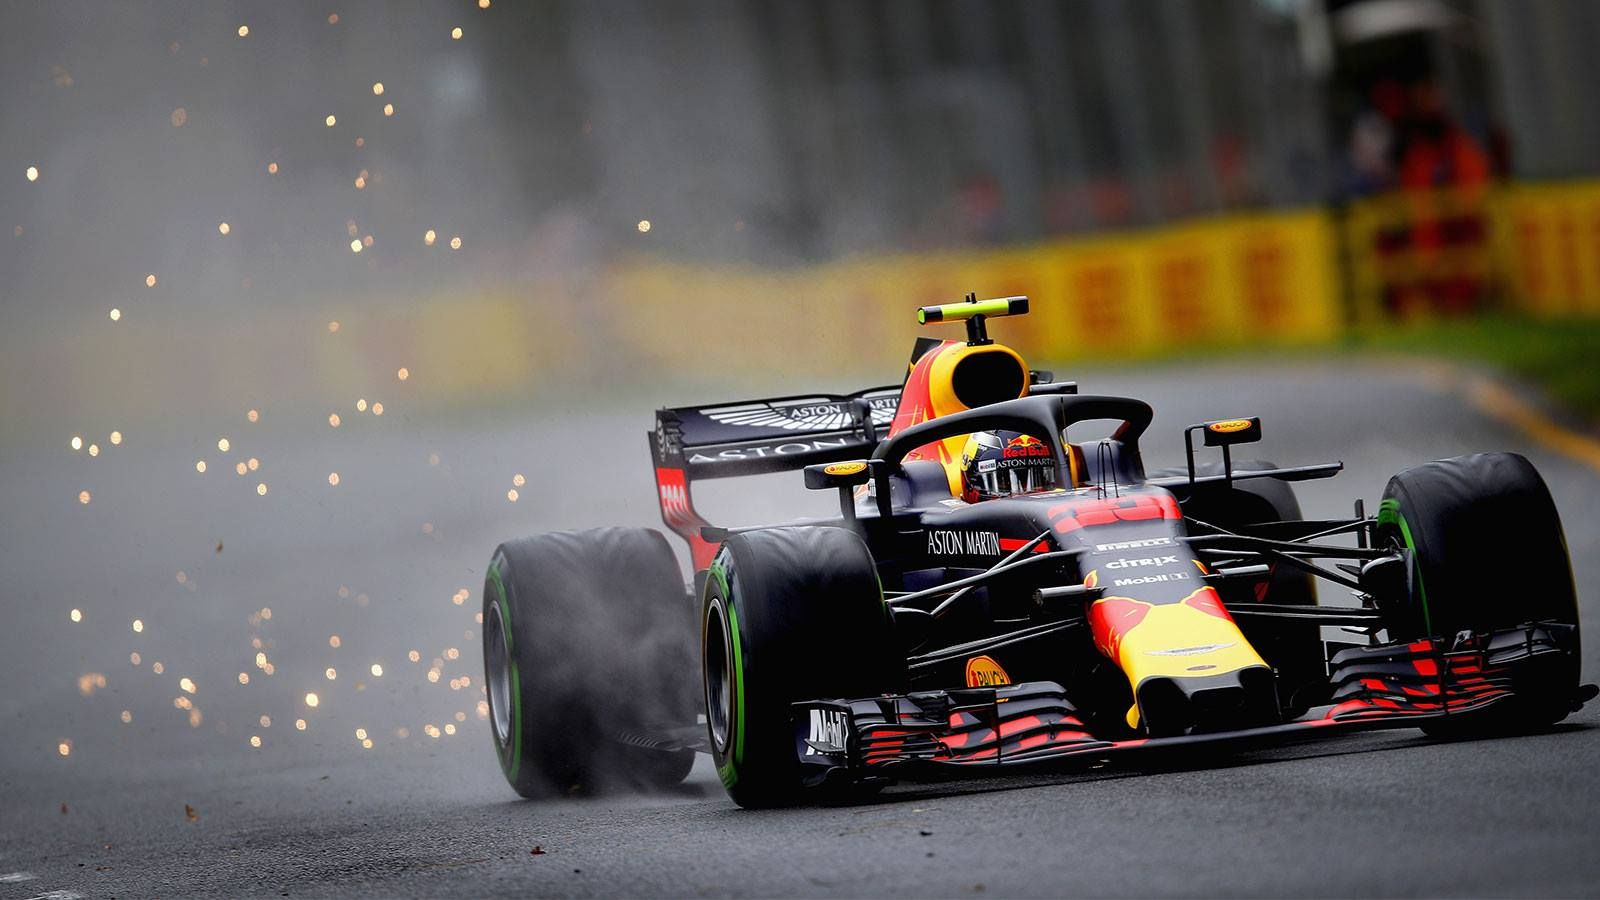 Dutch Grand Prix to go as scheduled despite protests by environmentalists